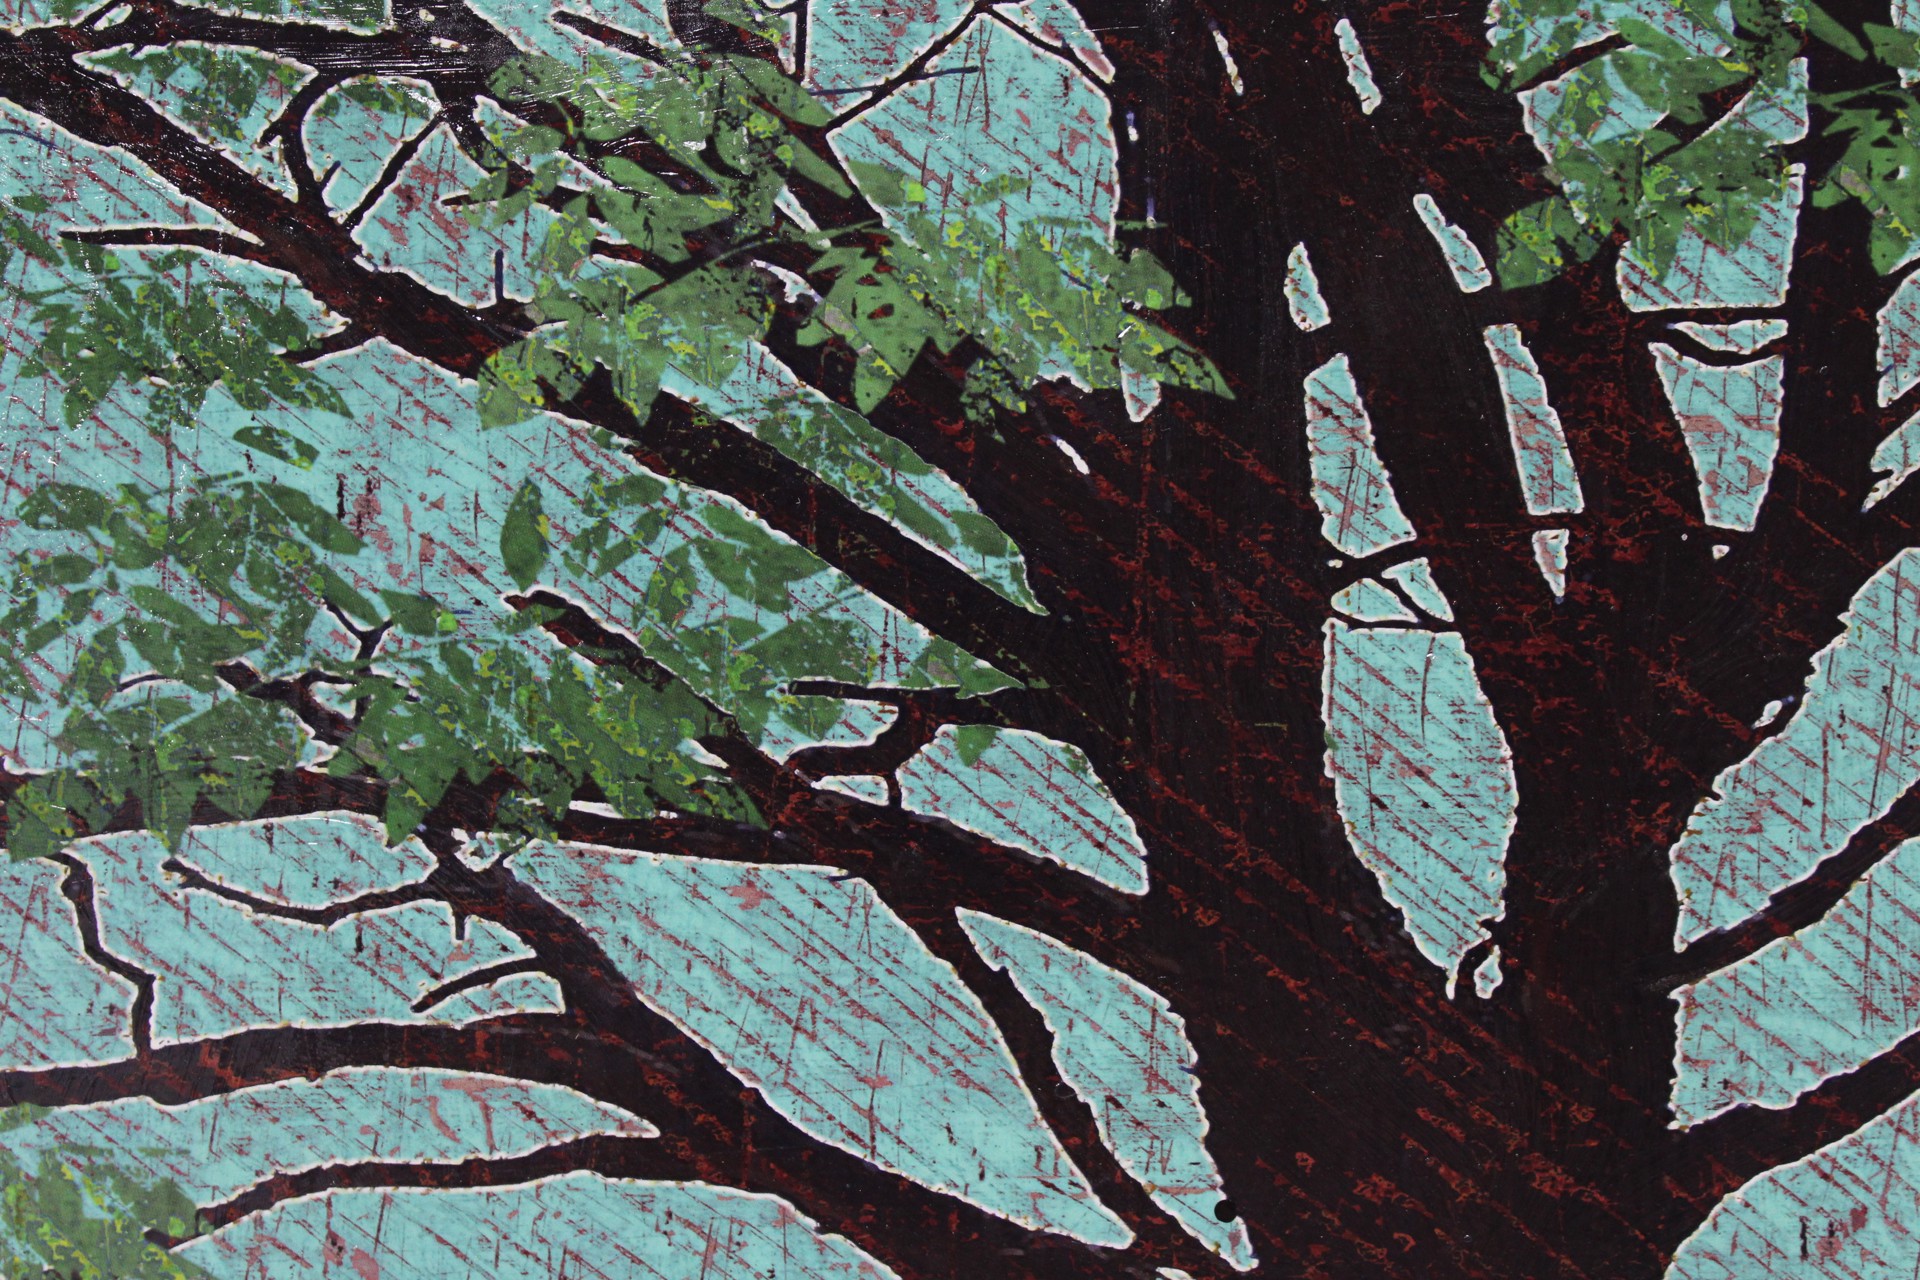 Roots & Branches (A.P.) by Jon Langford